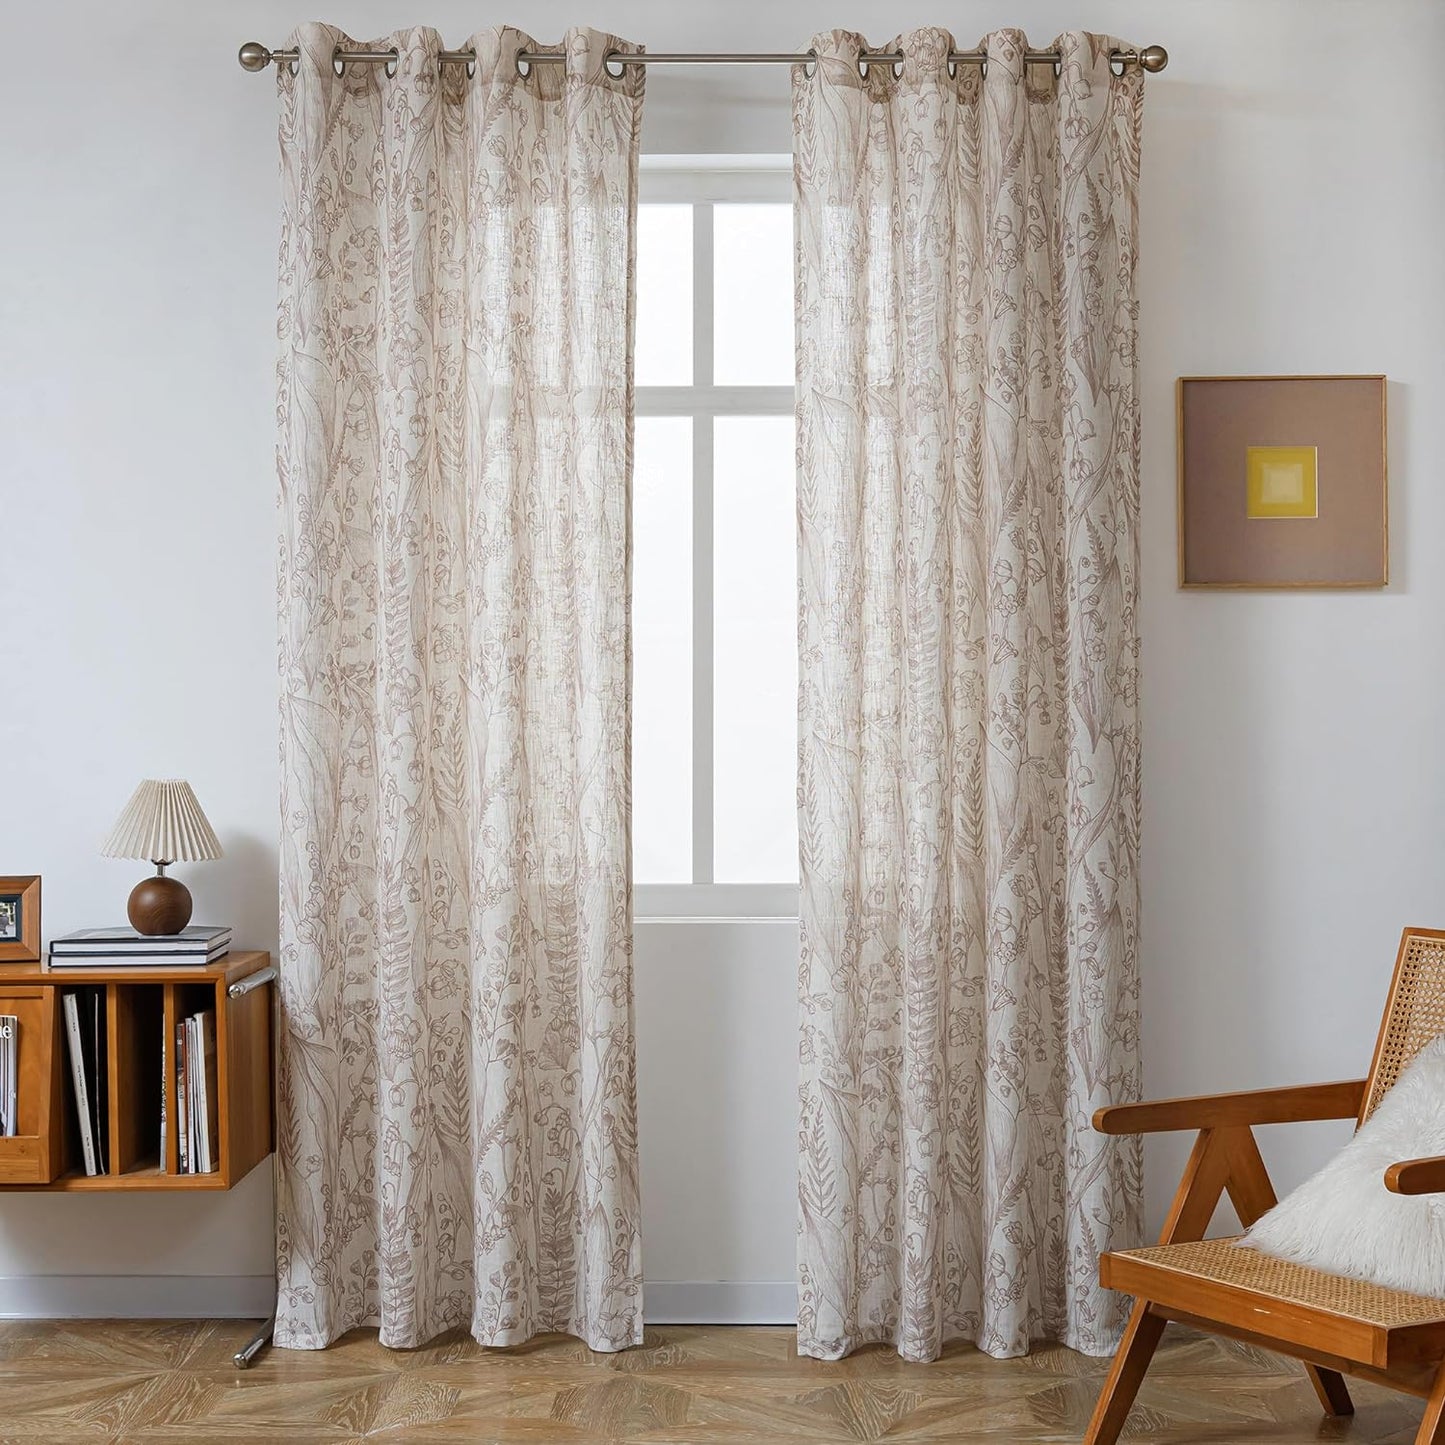 Floral Curtains 84 Inches Long Linen Curtains for Living Room Bedroom Light Filtering Privacy Protect Drapes Set Soft Touch Plant Pattern Window Treatment, 52" Wide, Brown, 2 Panels  MEETSKY   